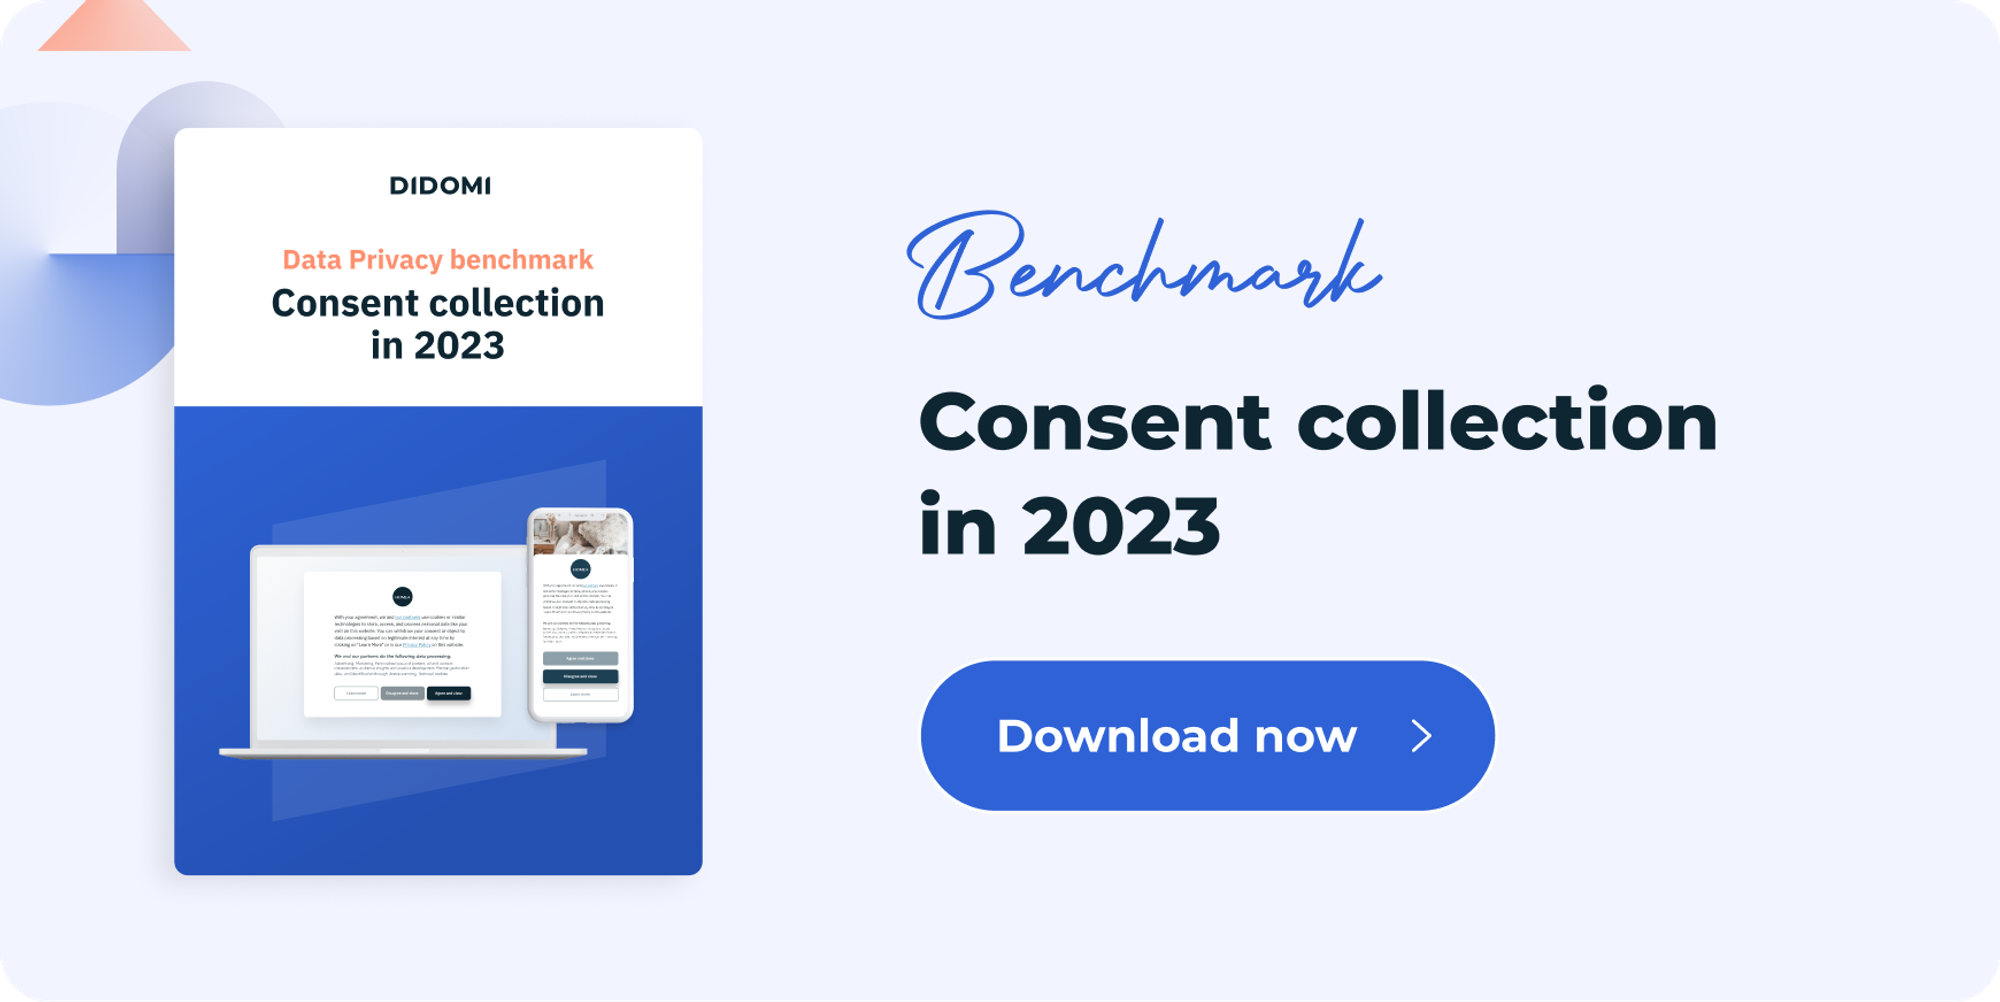 Didomi - consent collection benchmark 2023